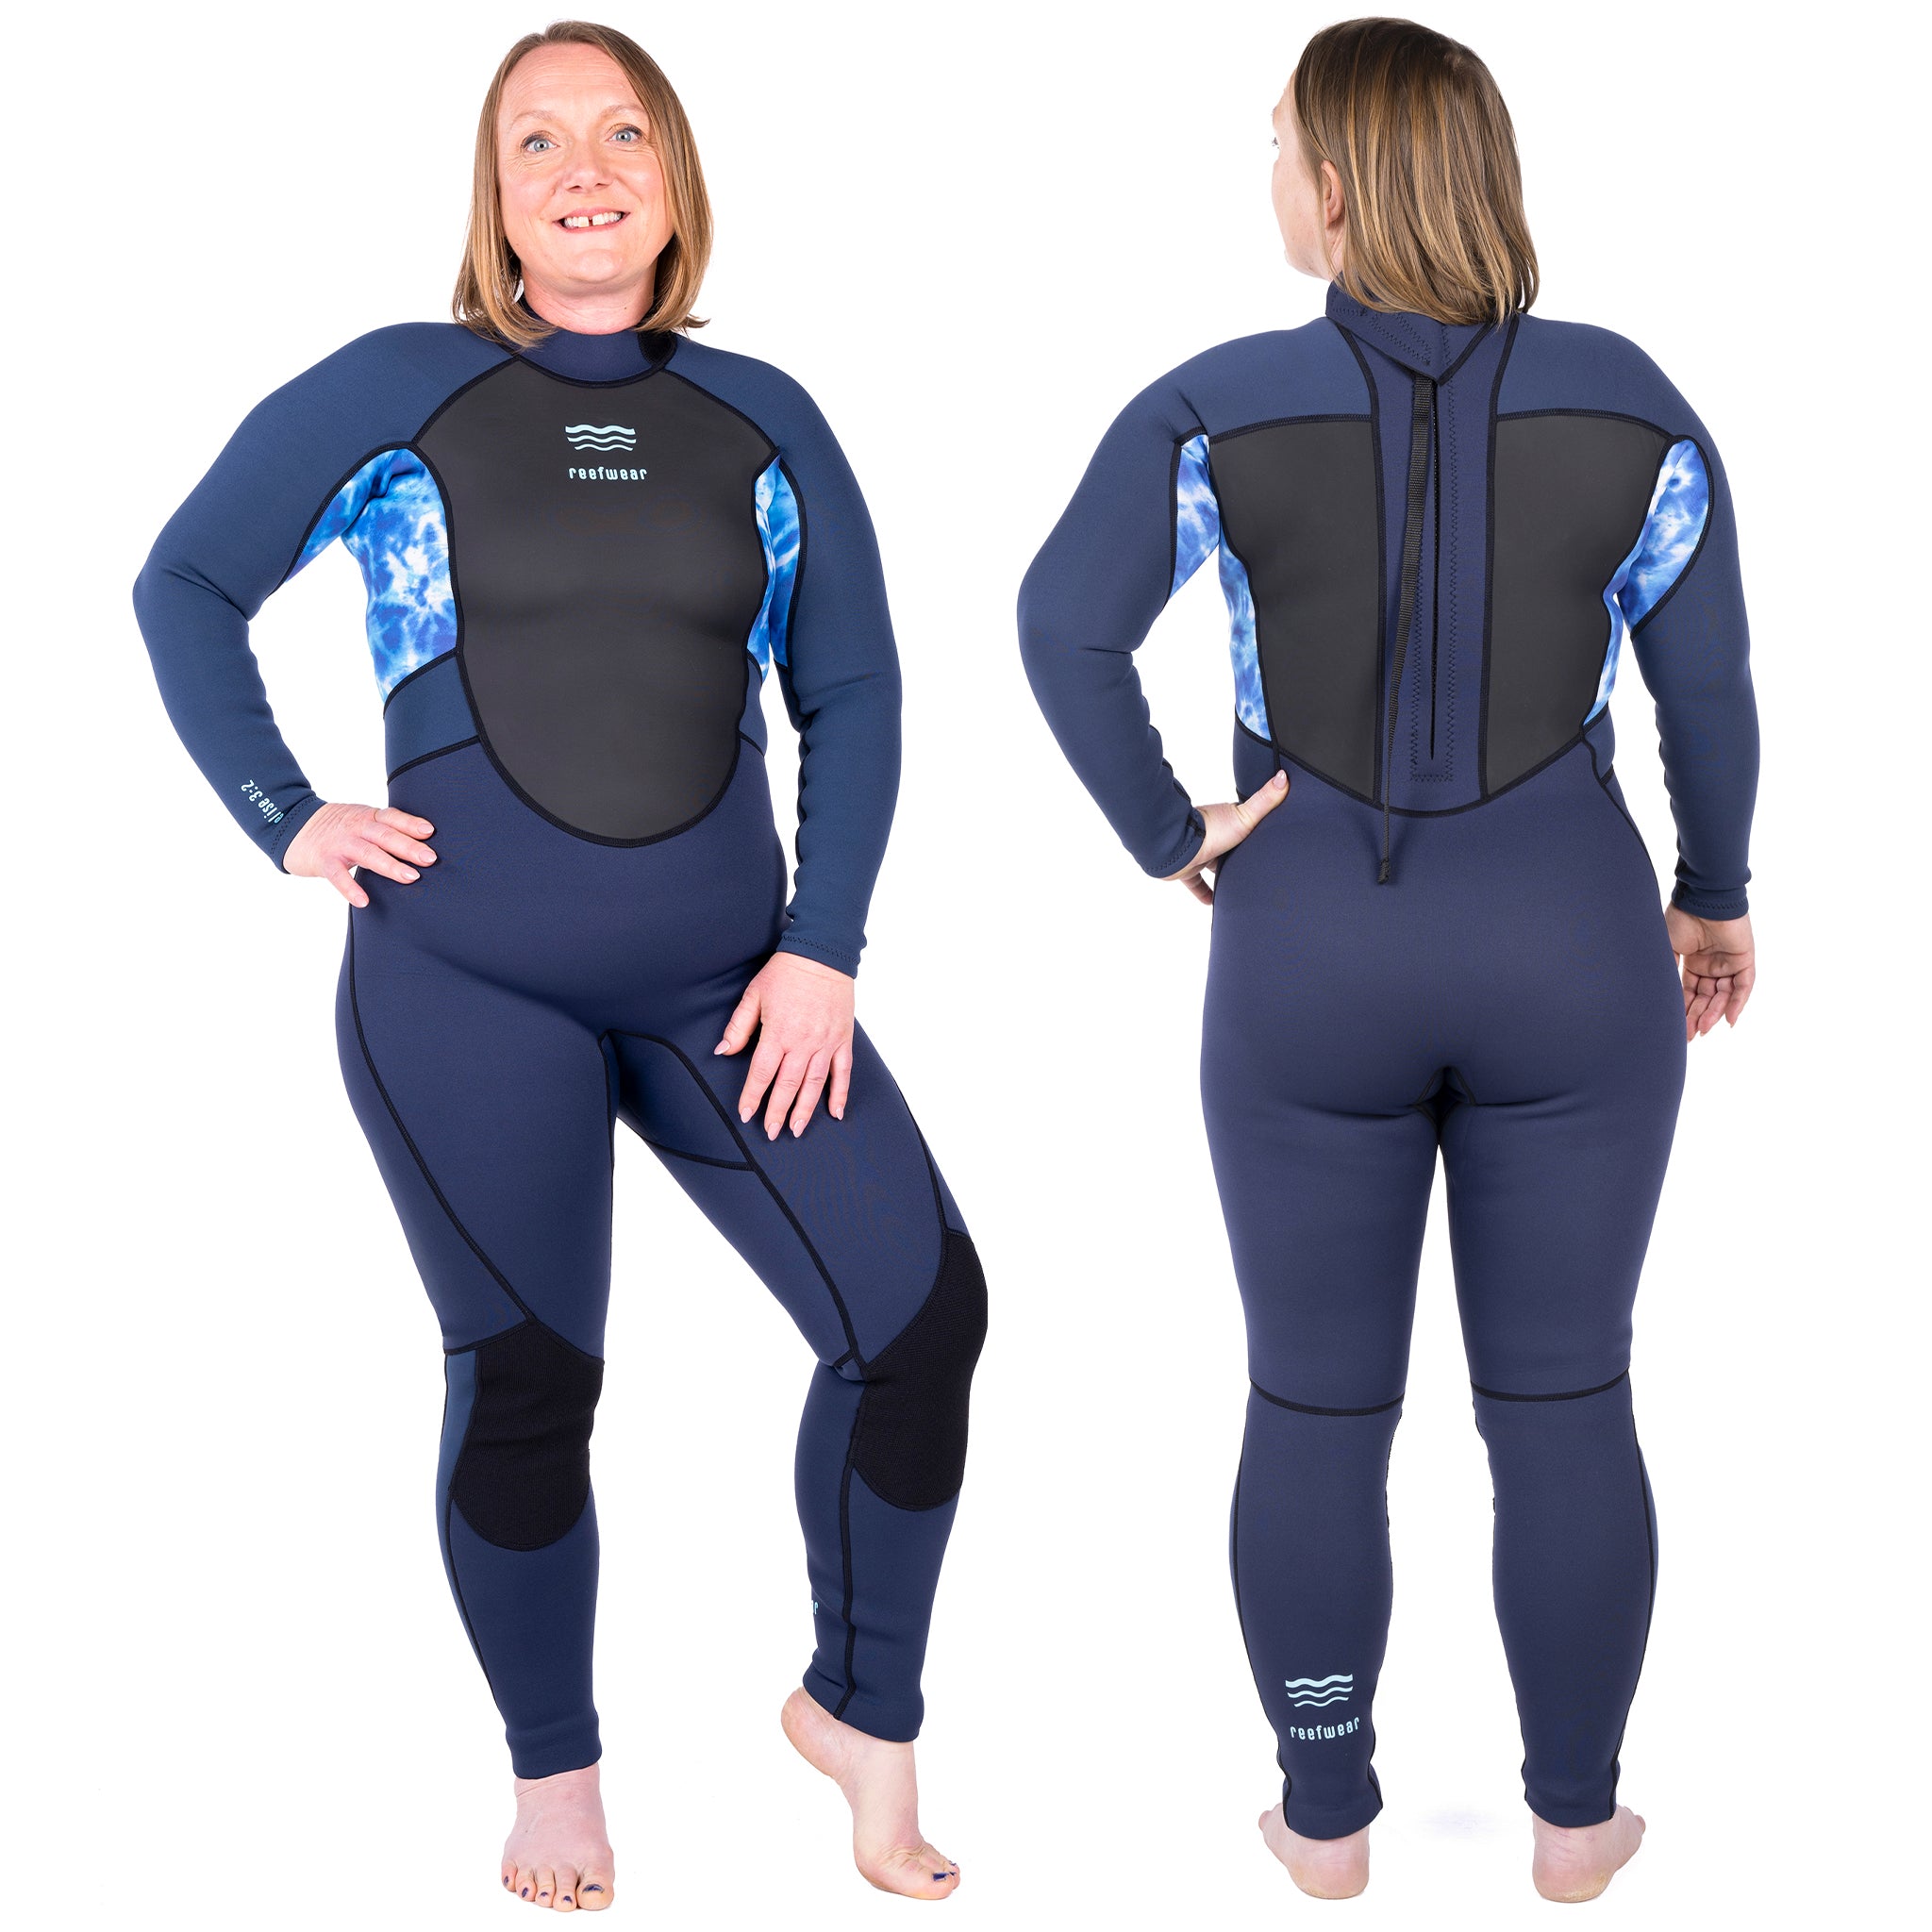 Reefwear Elise 3/2mm Women's Steamer Wetsuit | Front and back view